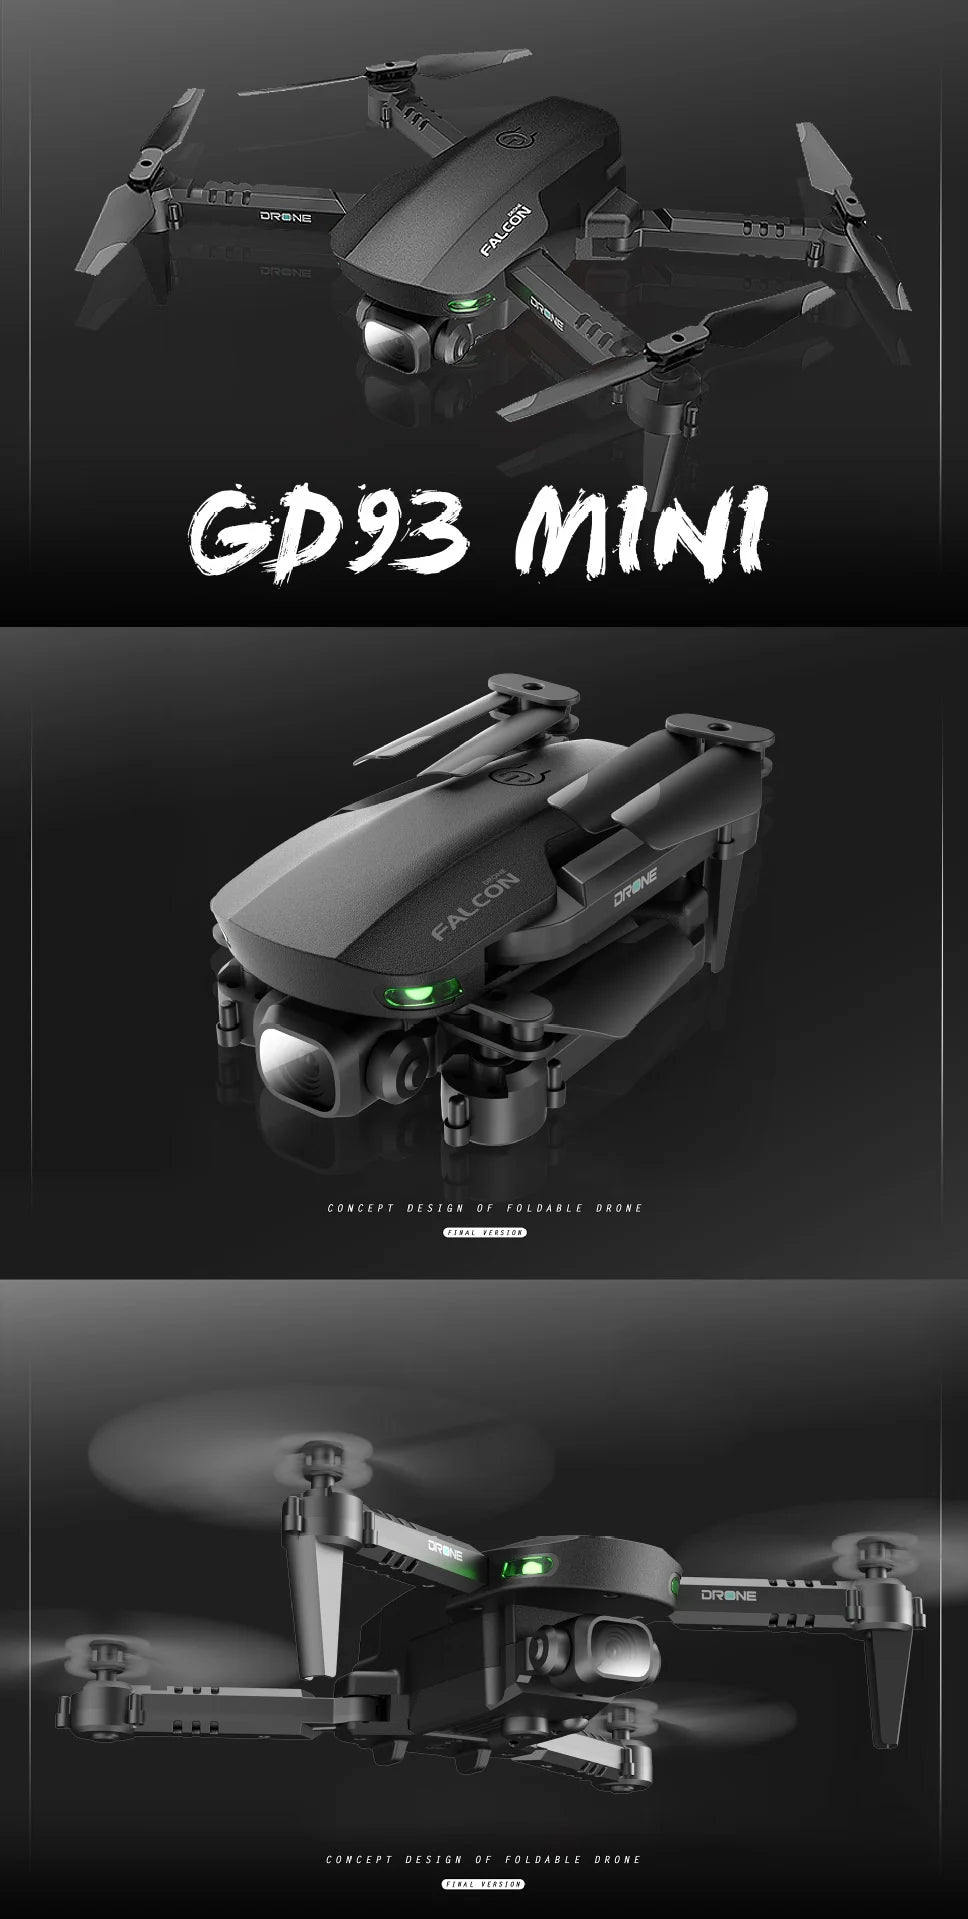 gd93 mini drone weighs 0-250g (excluding